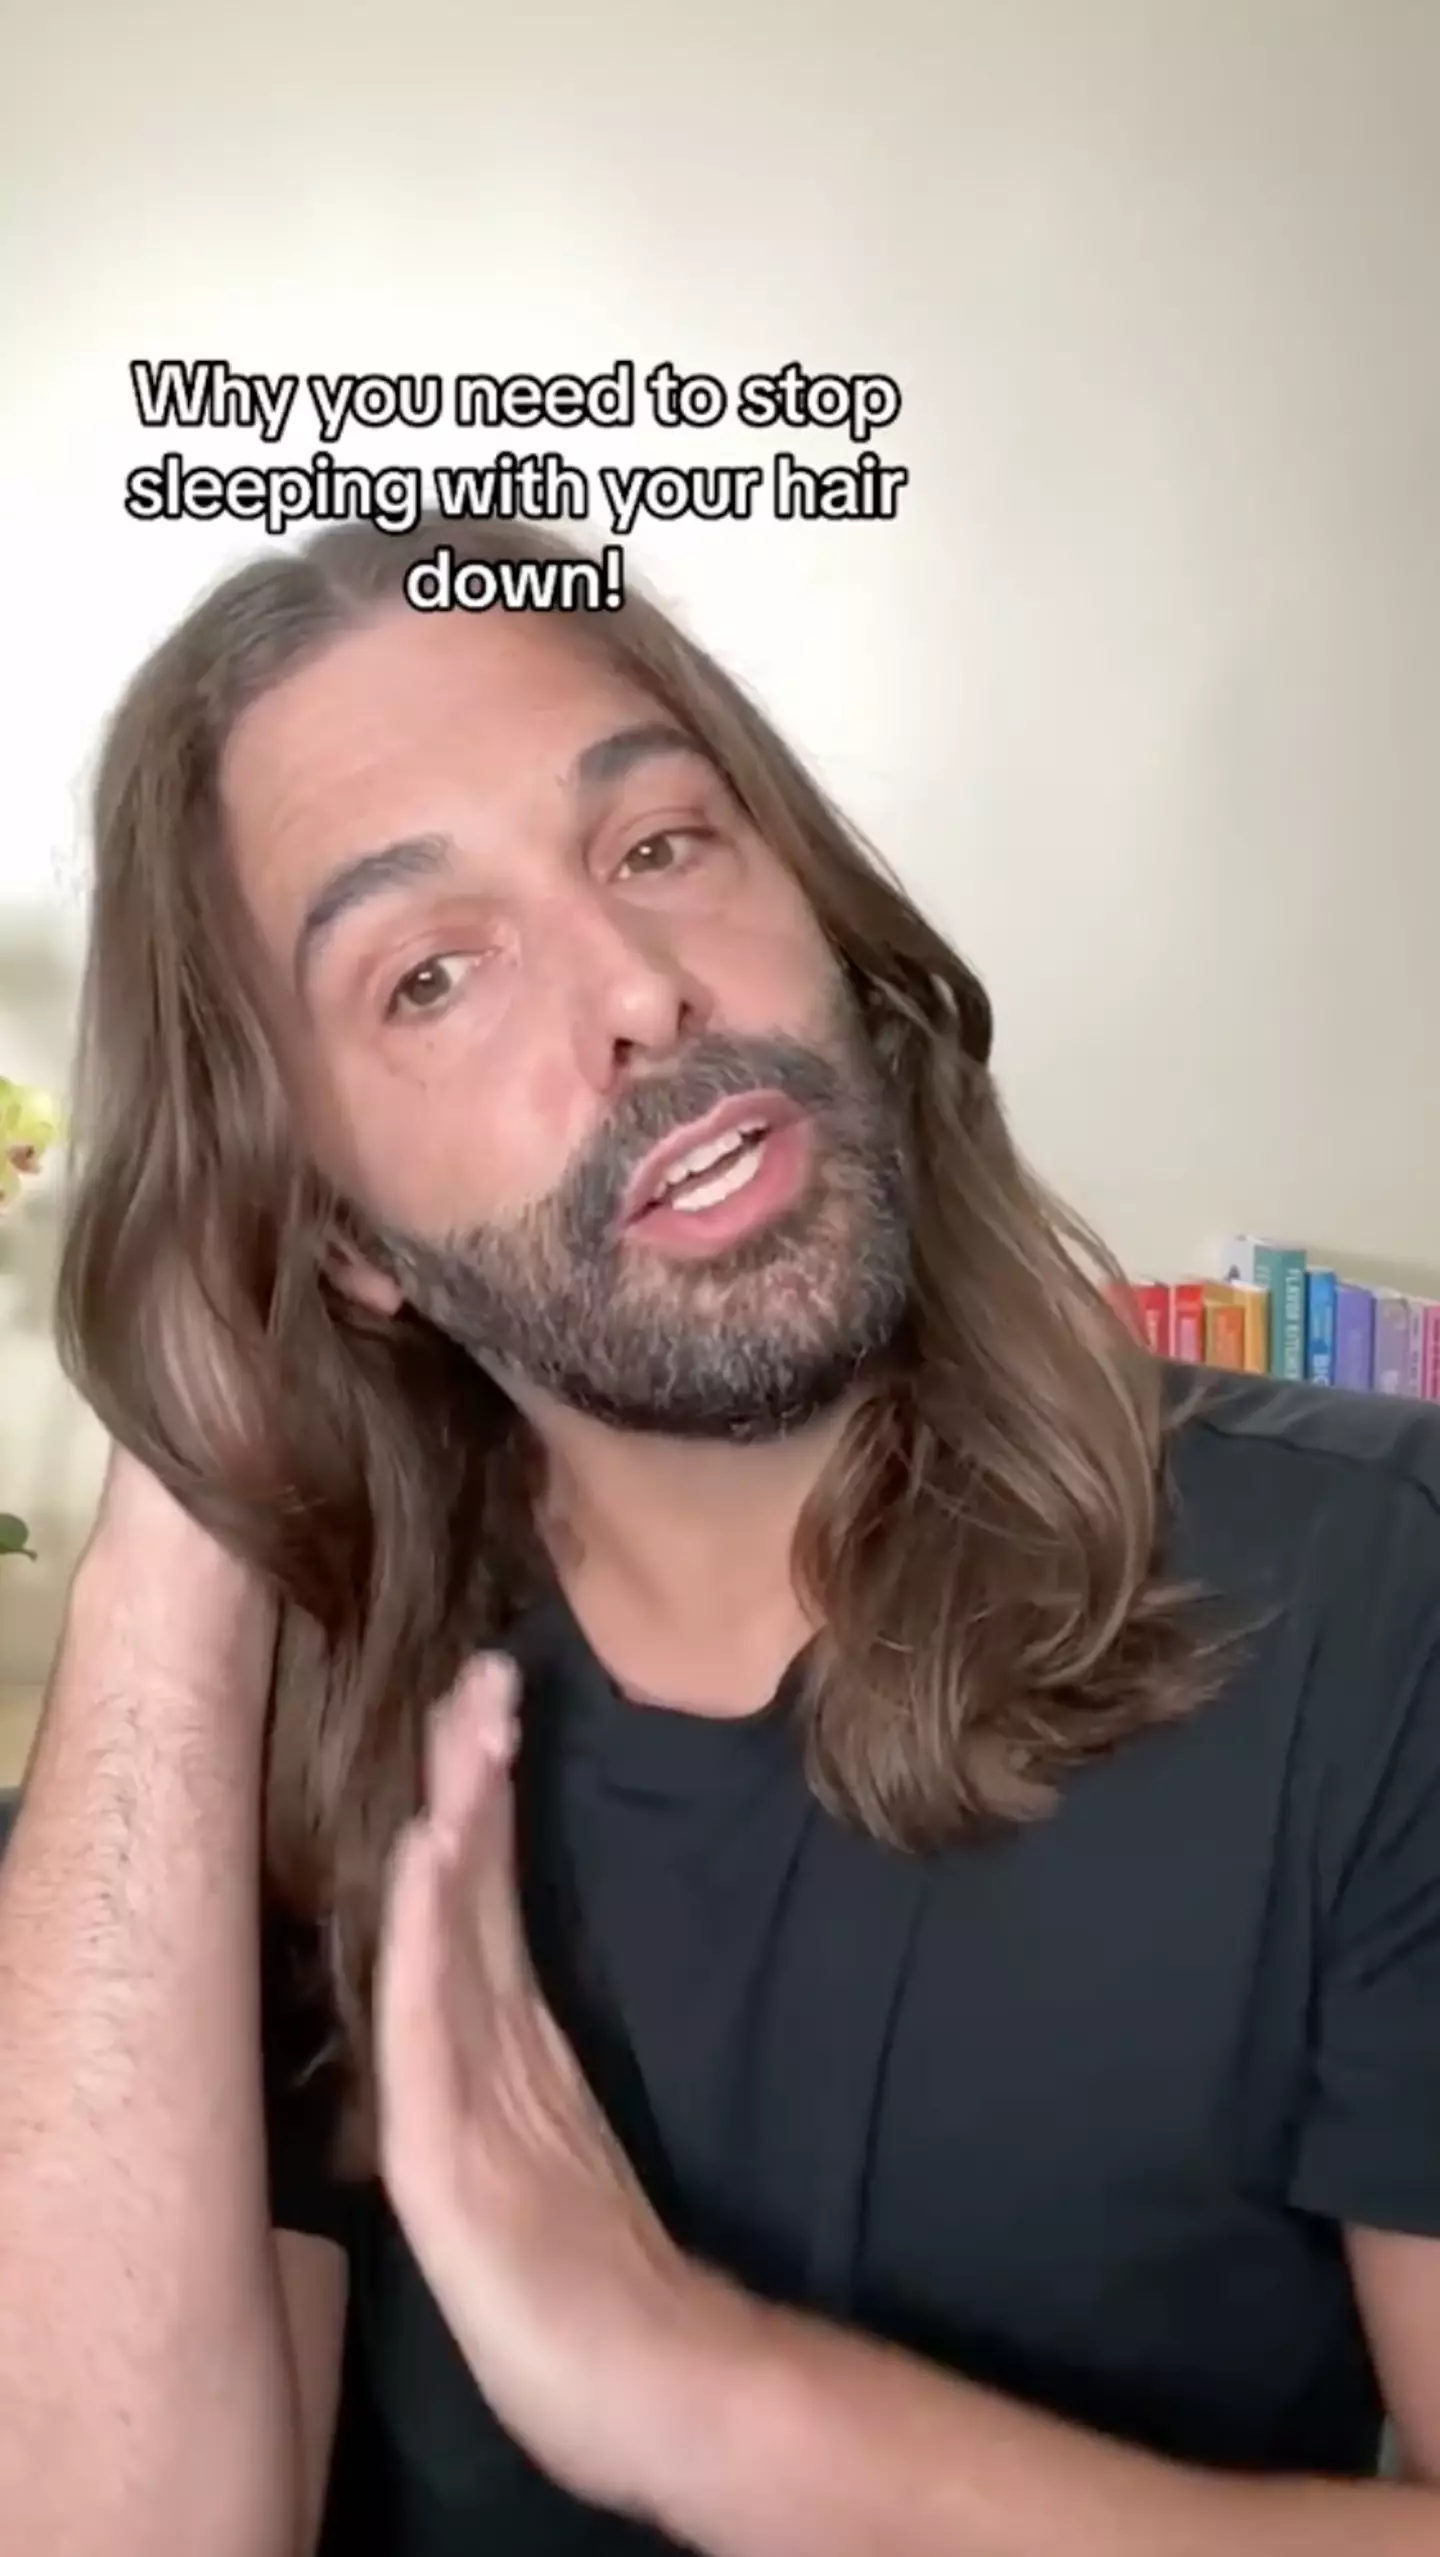 Queer Eye's Jonathan Van Ness said sleeping with your hair down causes 'too much heat'.